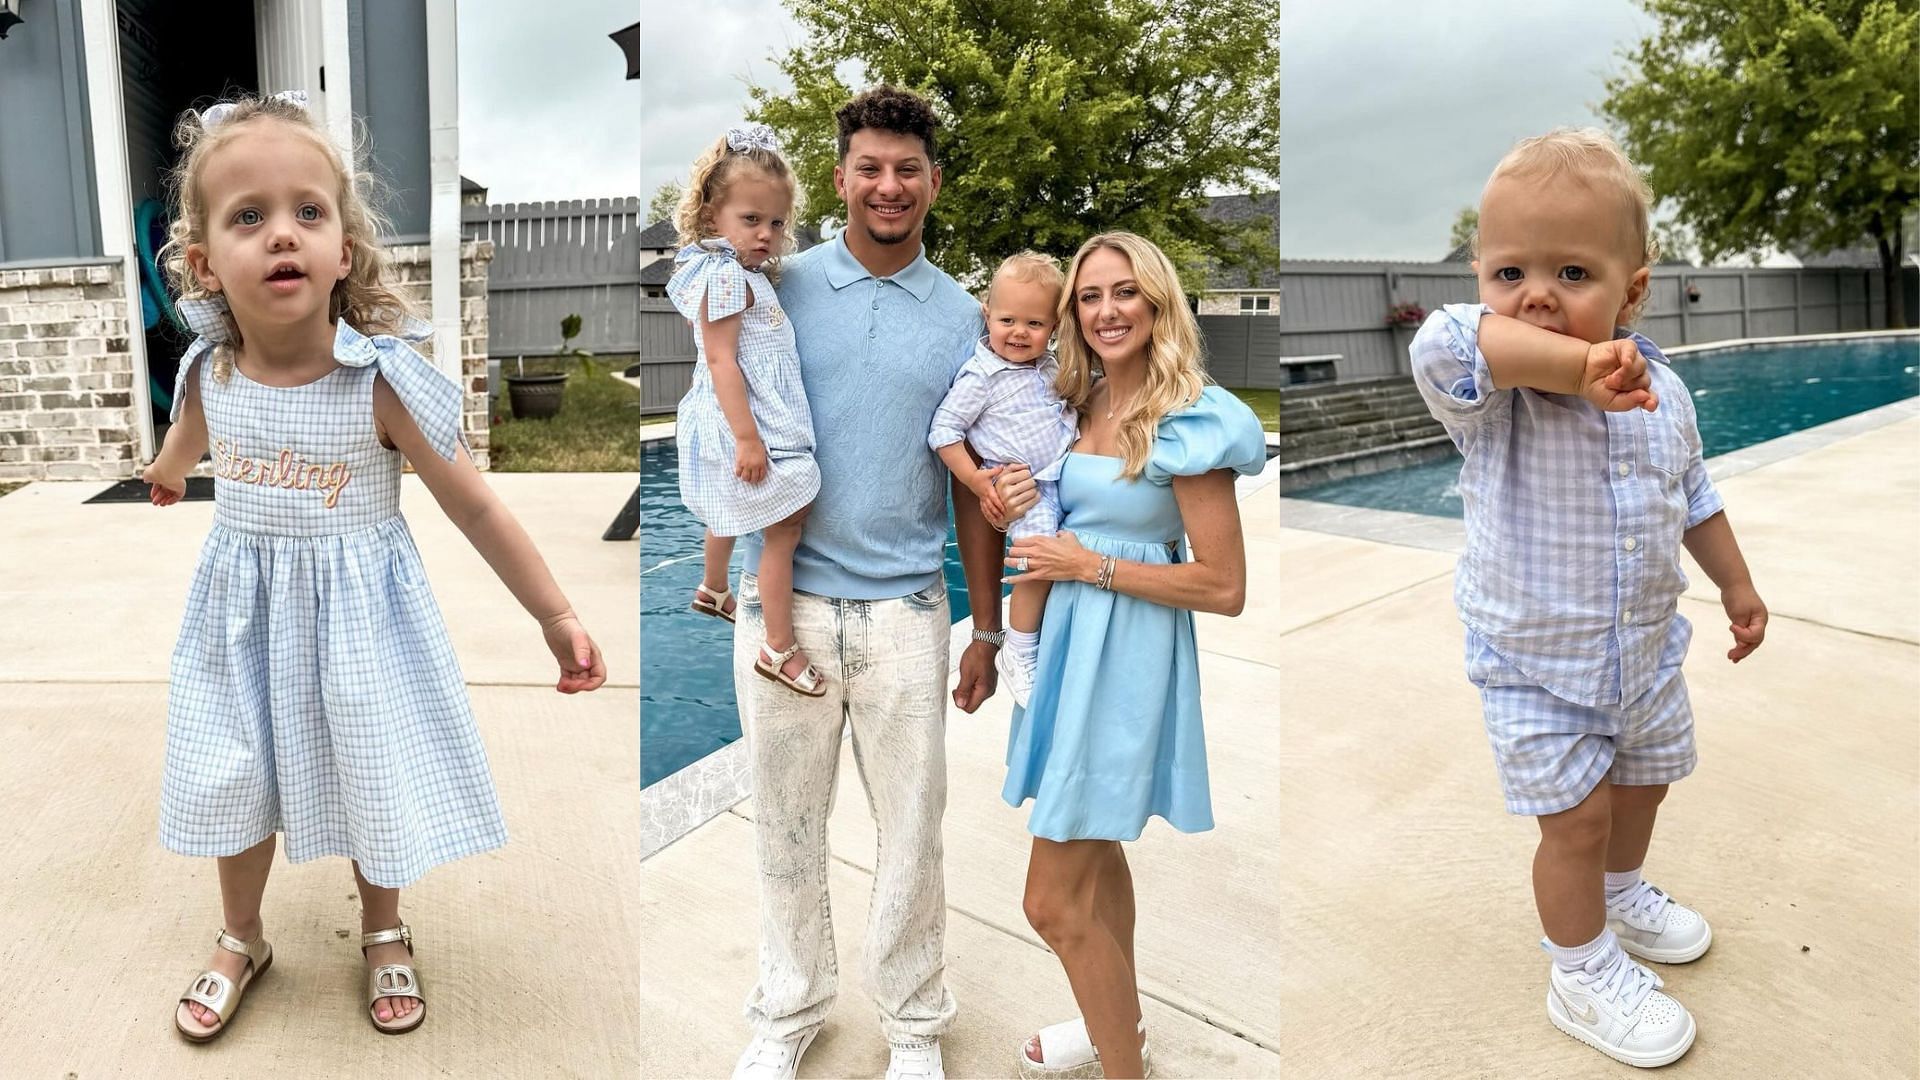 Patrick Mahomes and his family celebrate Easter